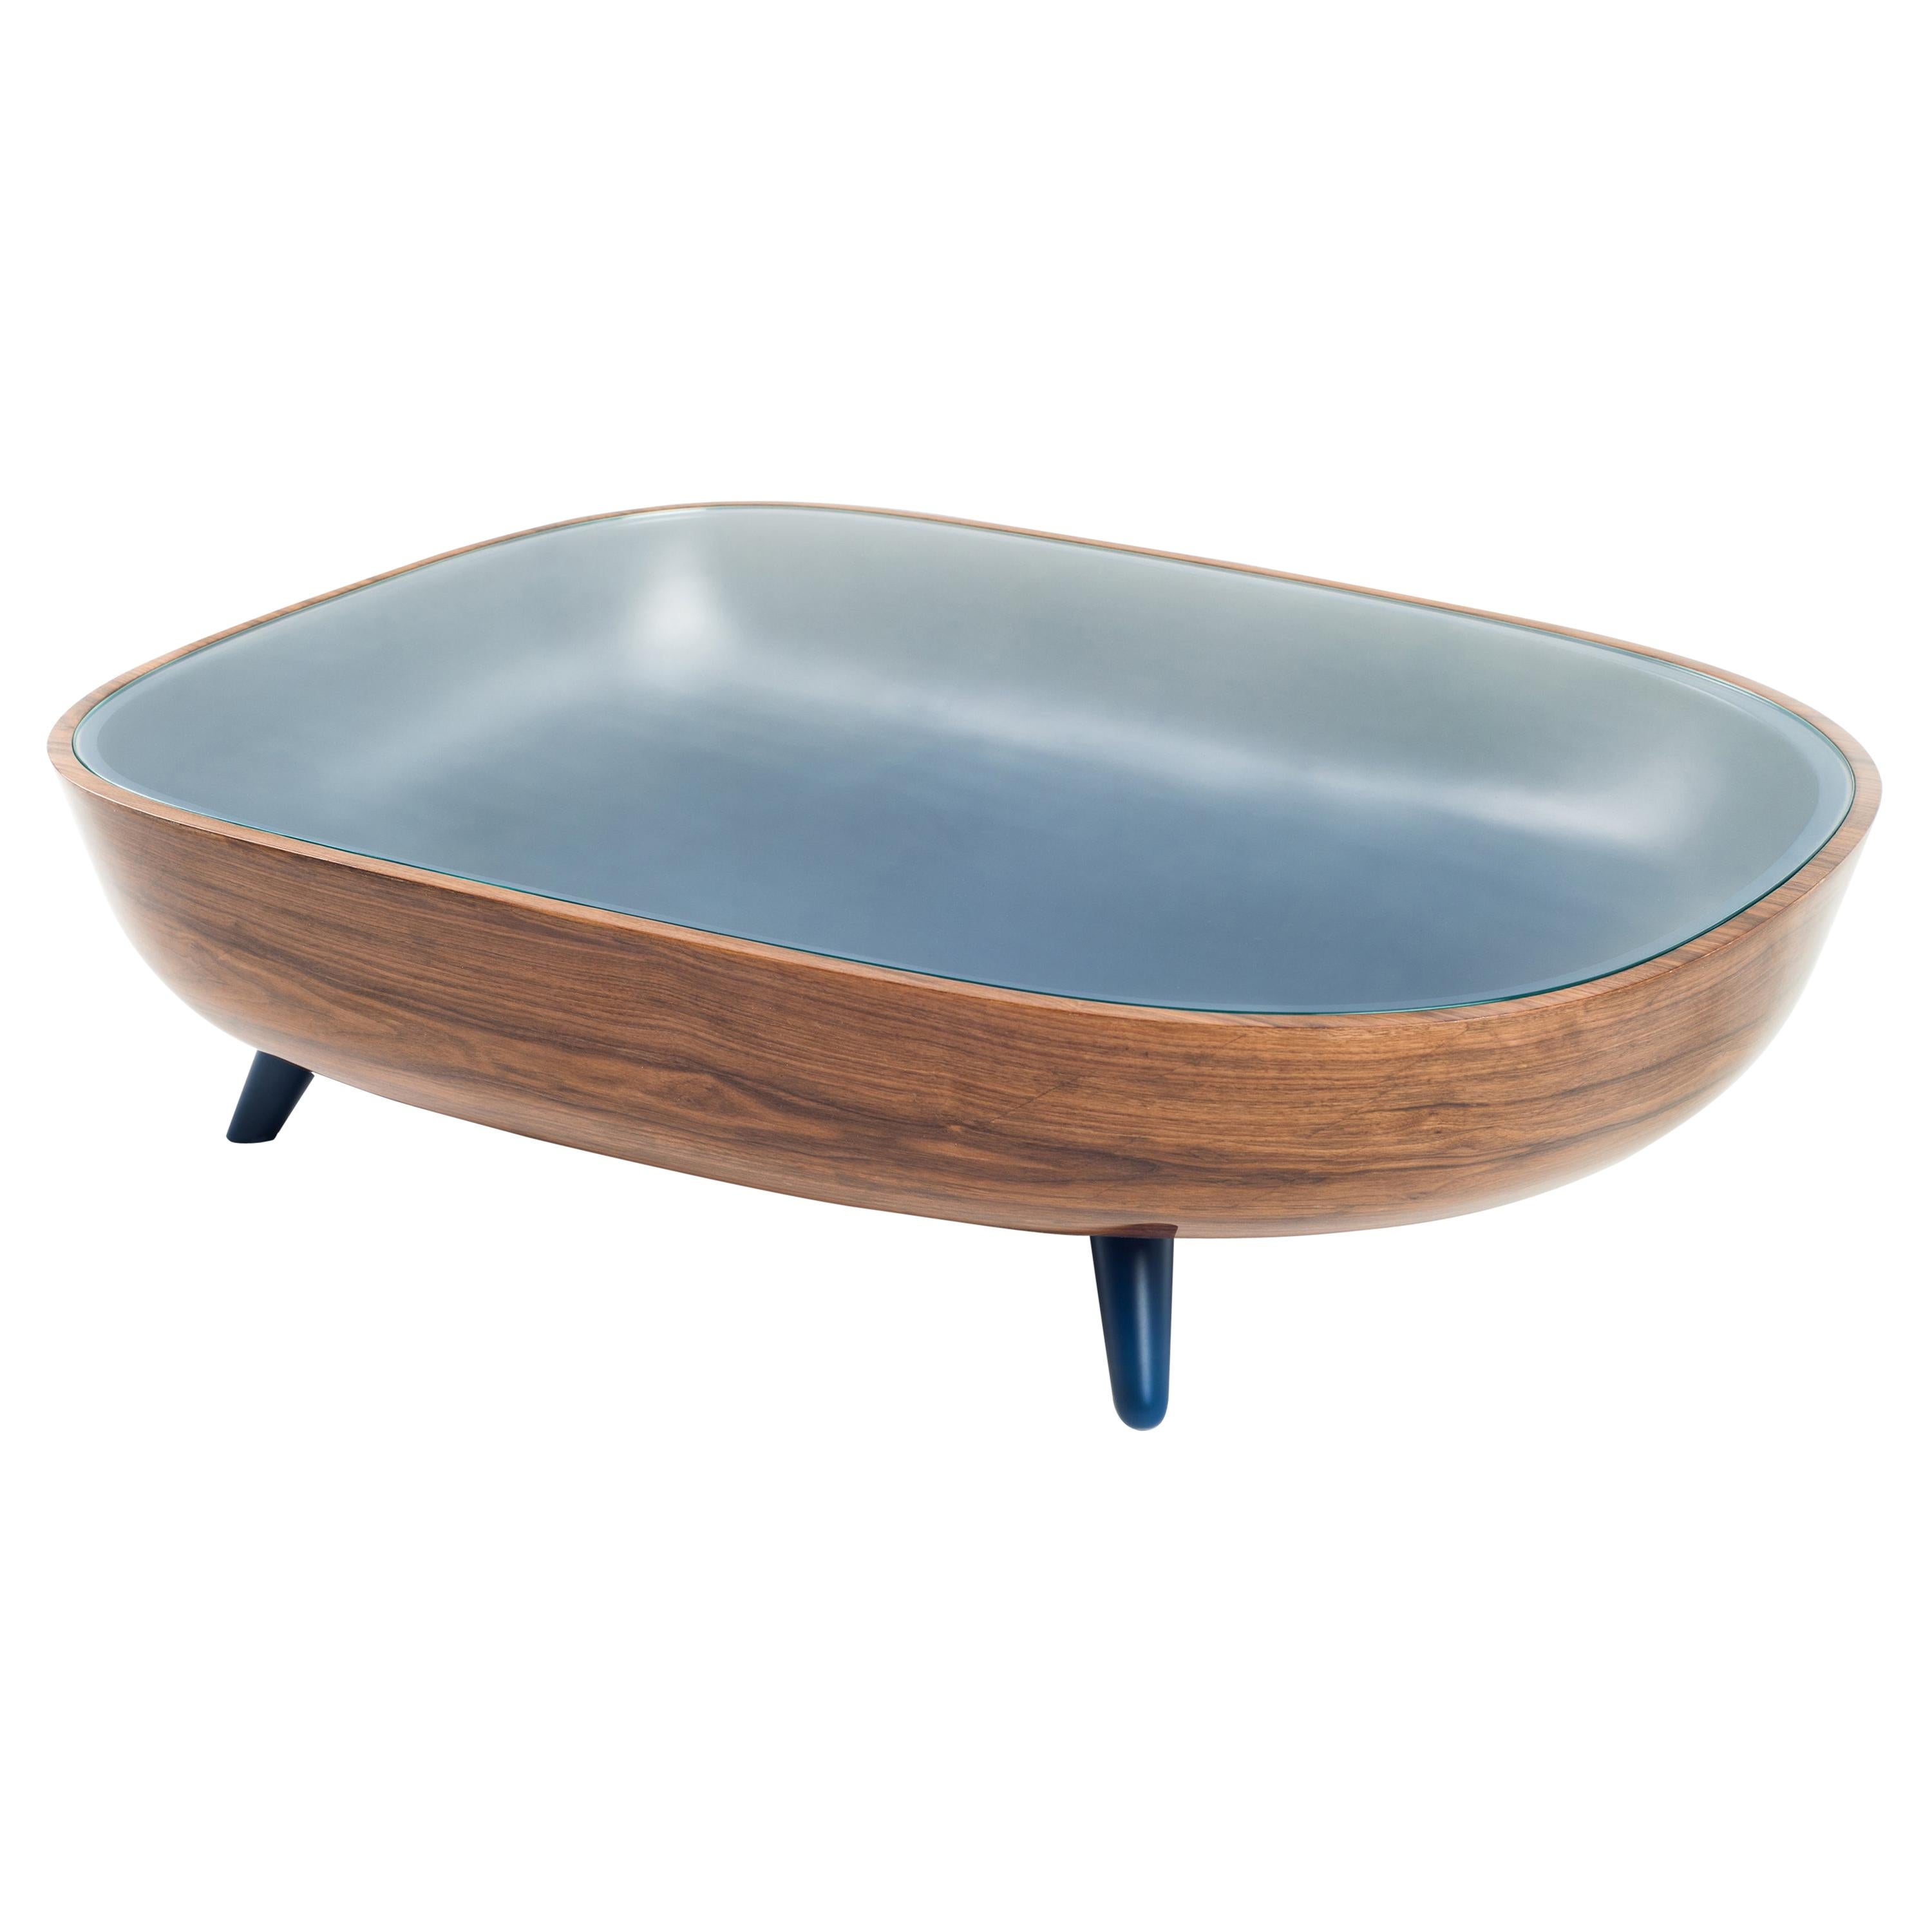 Walnut Coffee Table SPFERE with Glass Tabletop for Functional Interior For Sale